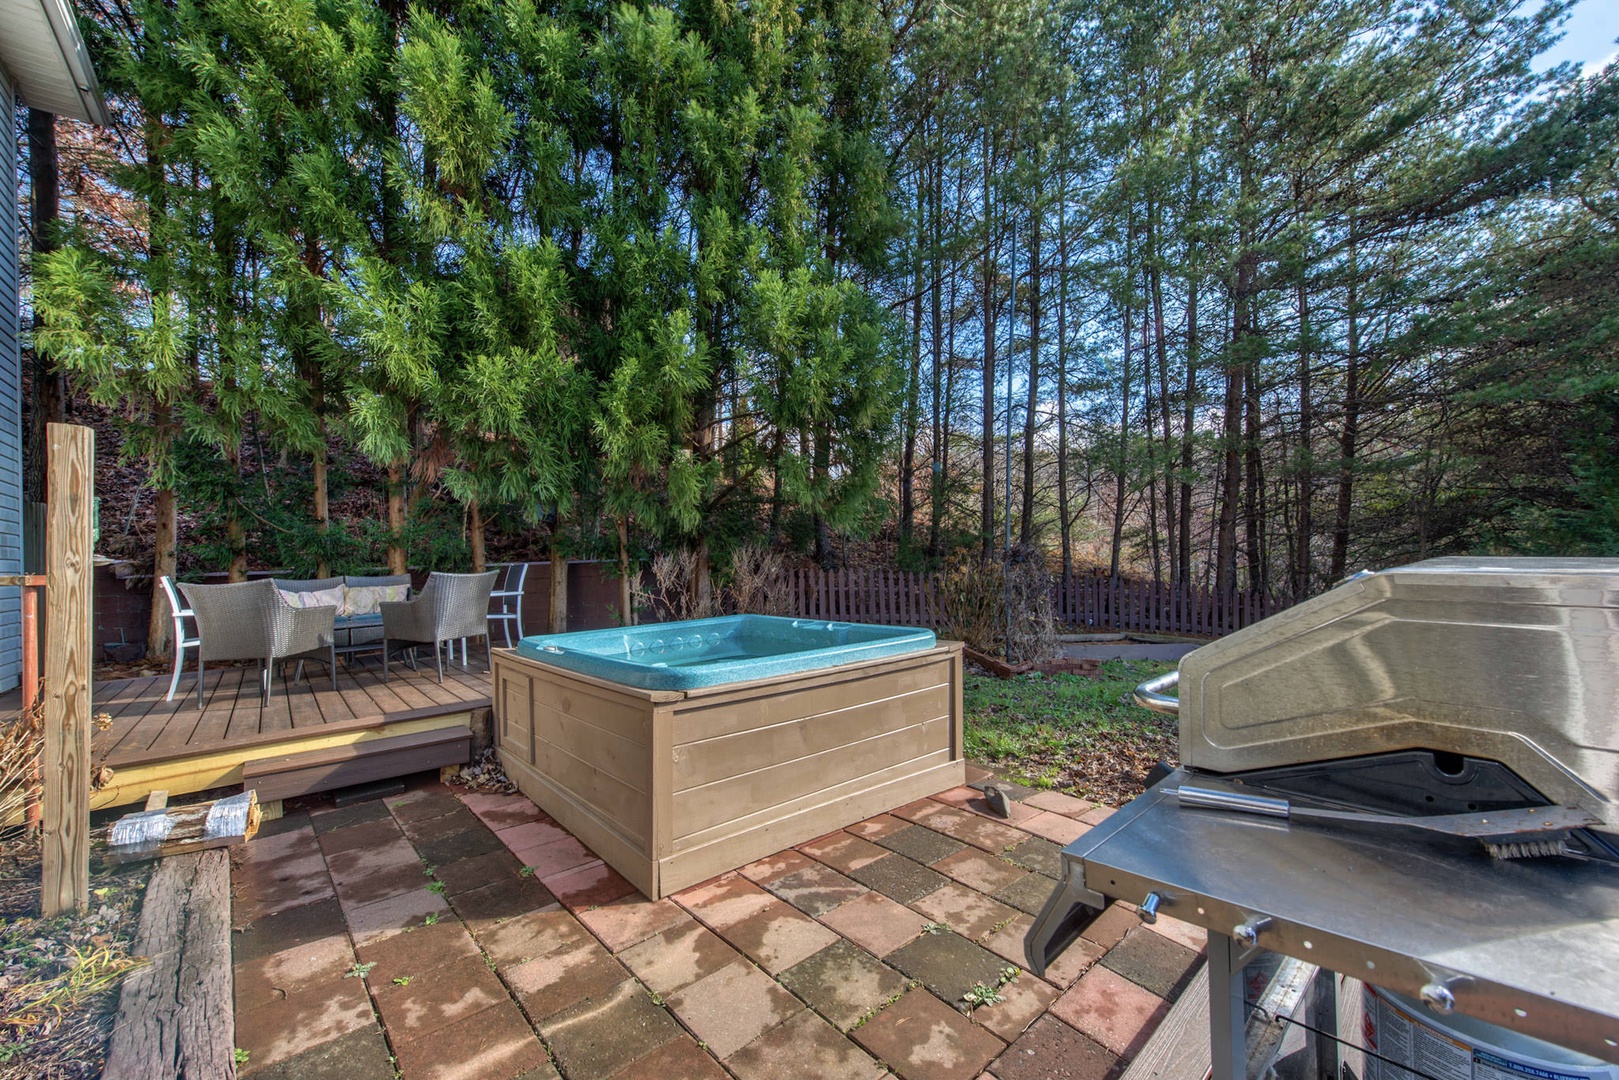 Hot tub with gas BBQ grill